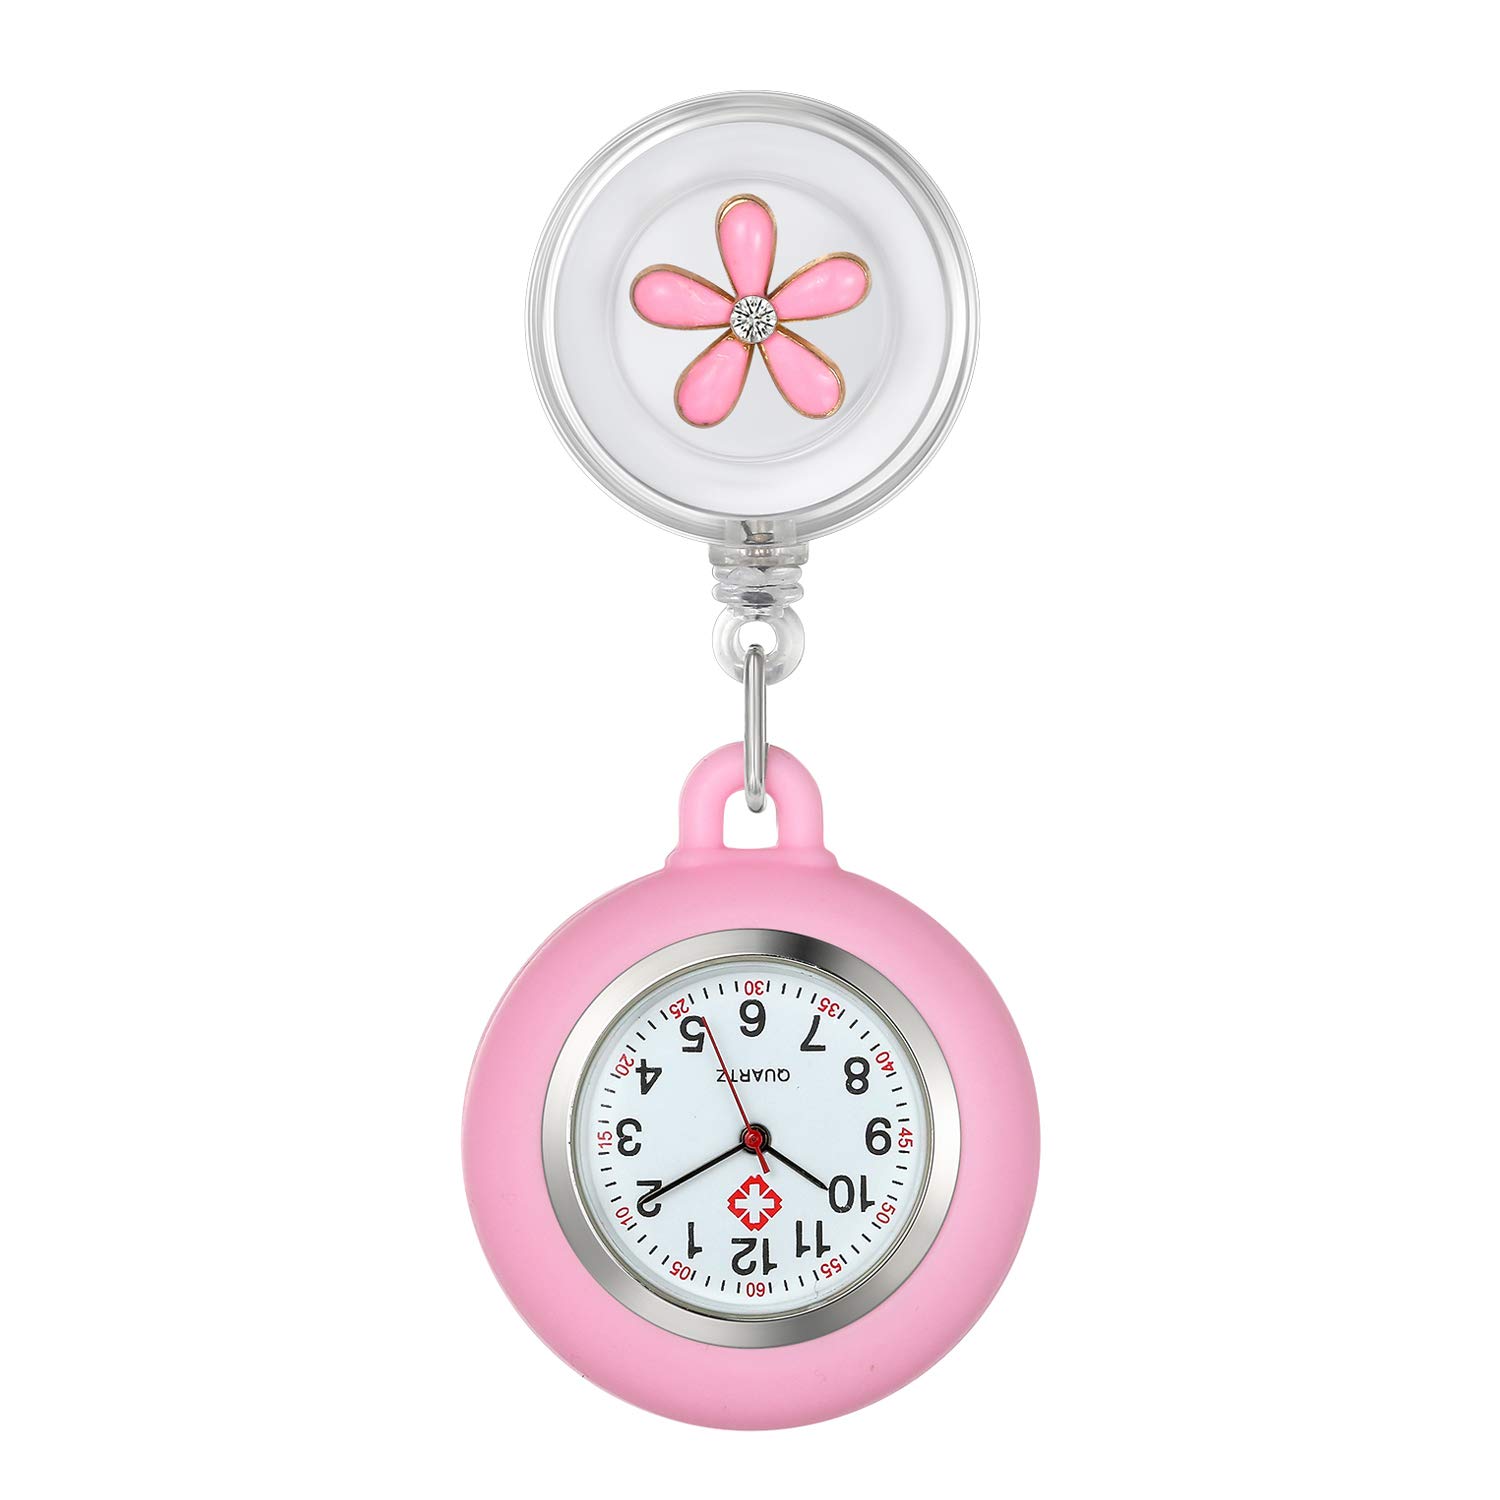 Lancardo Lapel Watch for Nurses Doctors Clip-on Hanging Nurse Watches Cute Leaves Pattern Silicon Cover Badge Stethoscope Retractable Fob Watch